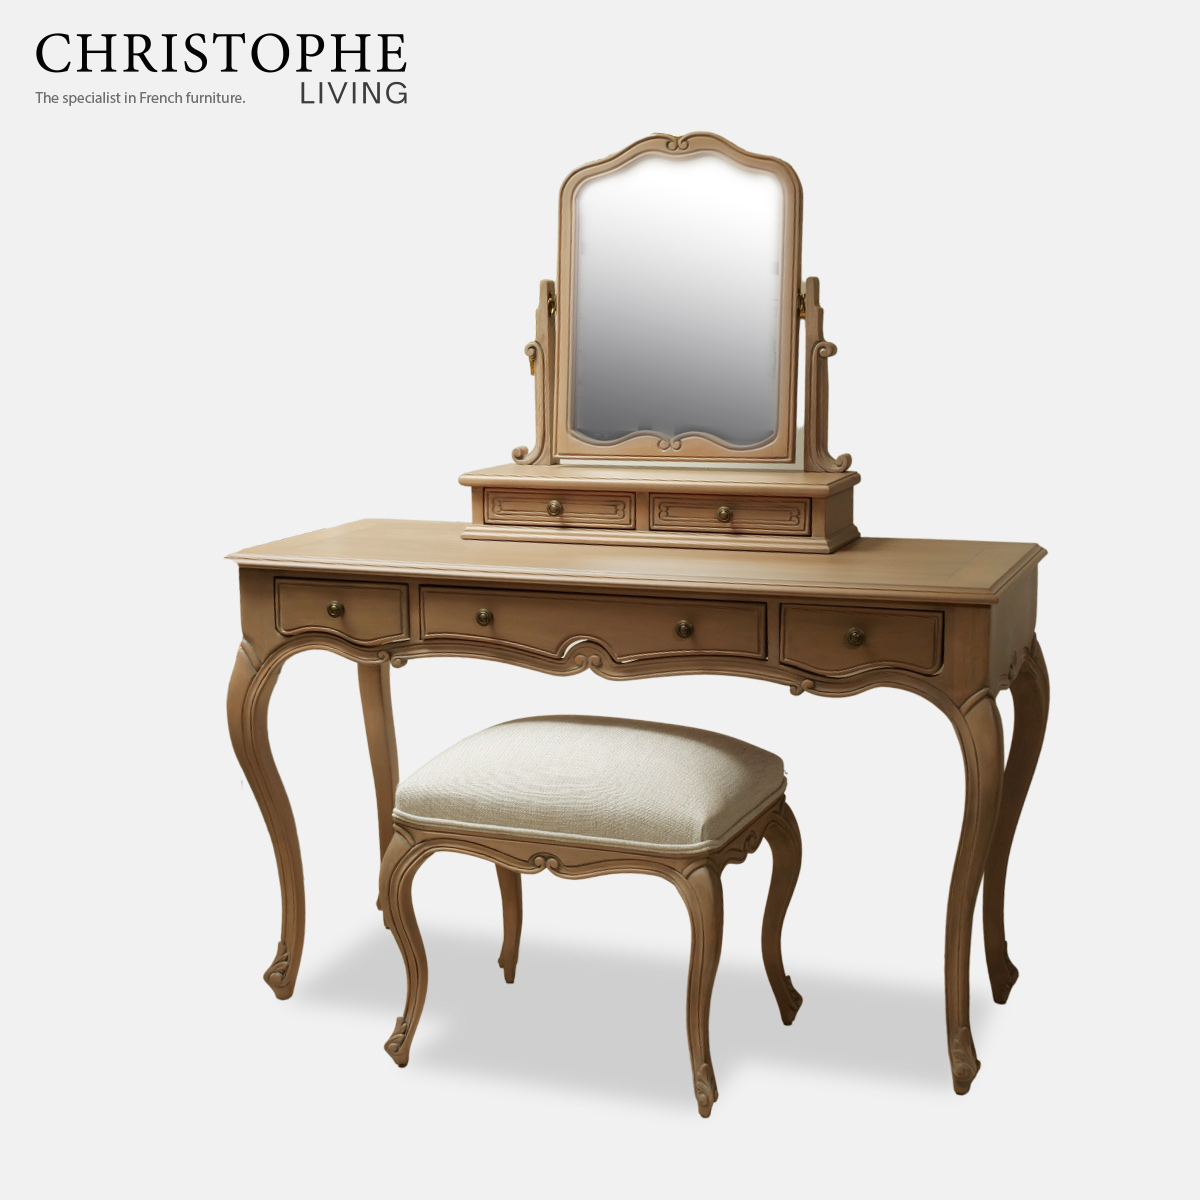 Hamptons French dresser with mirror and stool limewashed oak